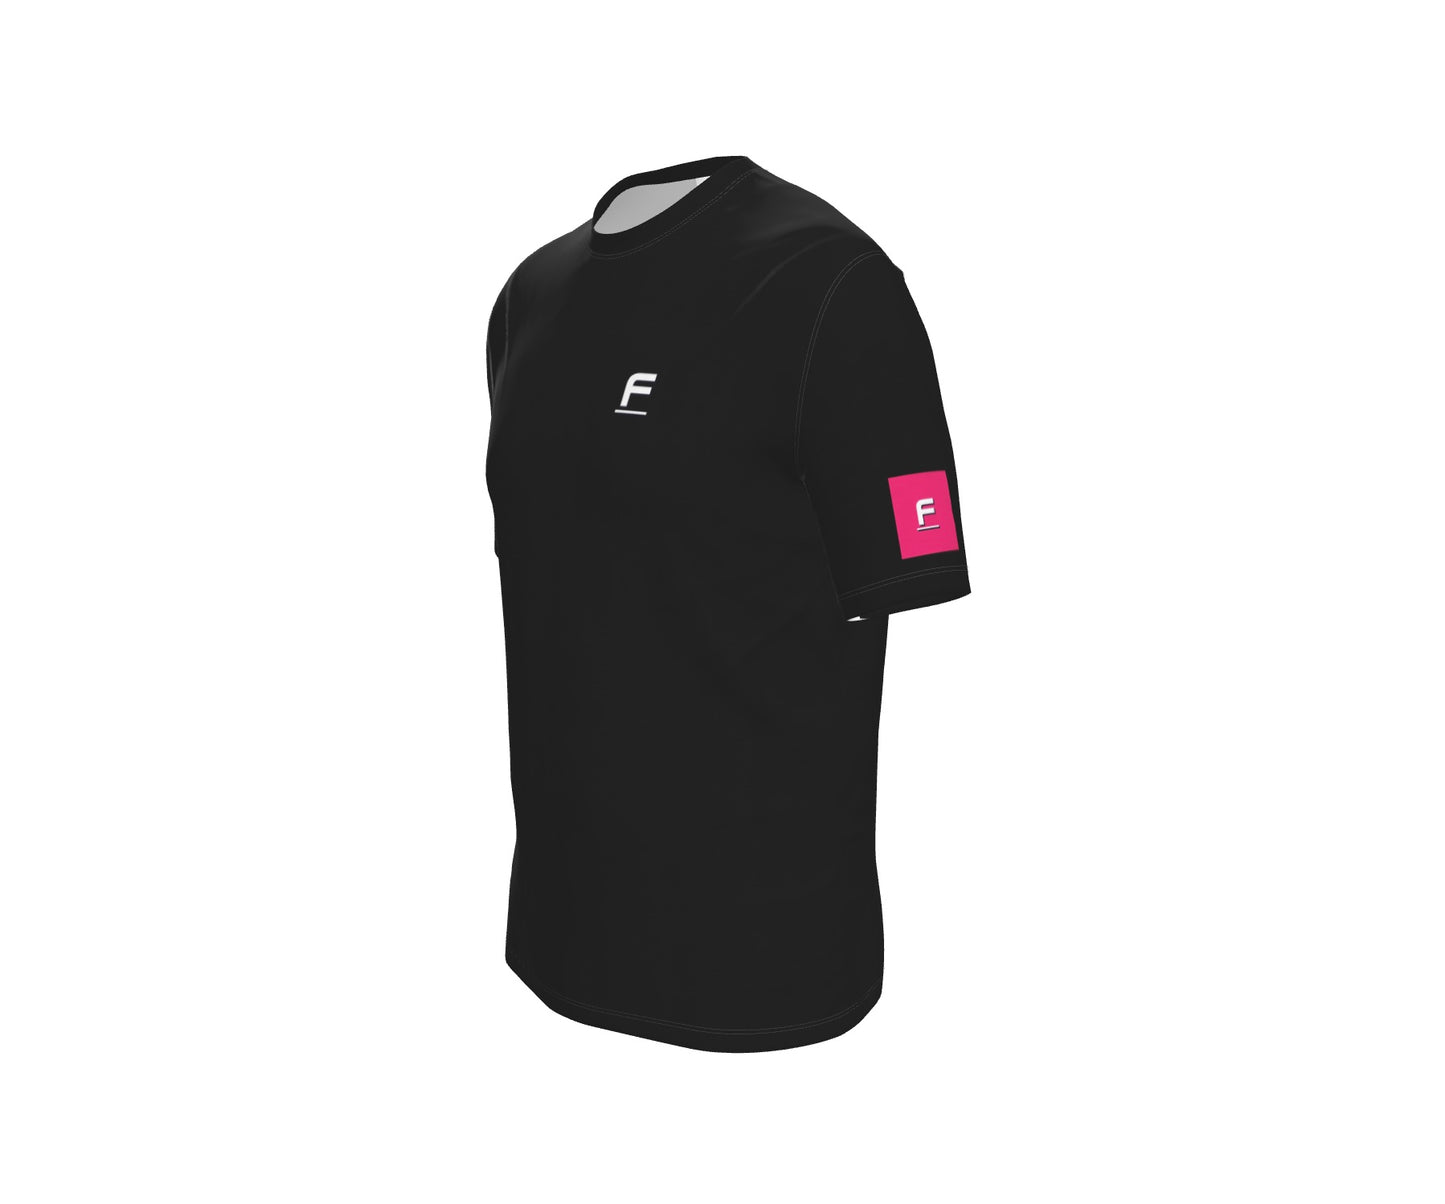 Sustain GT Racer T-Shirt - Pink Bolt on Black Limited Edition